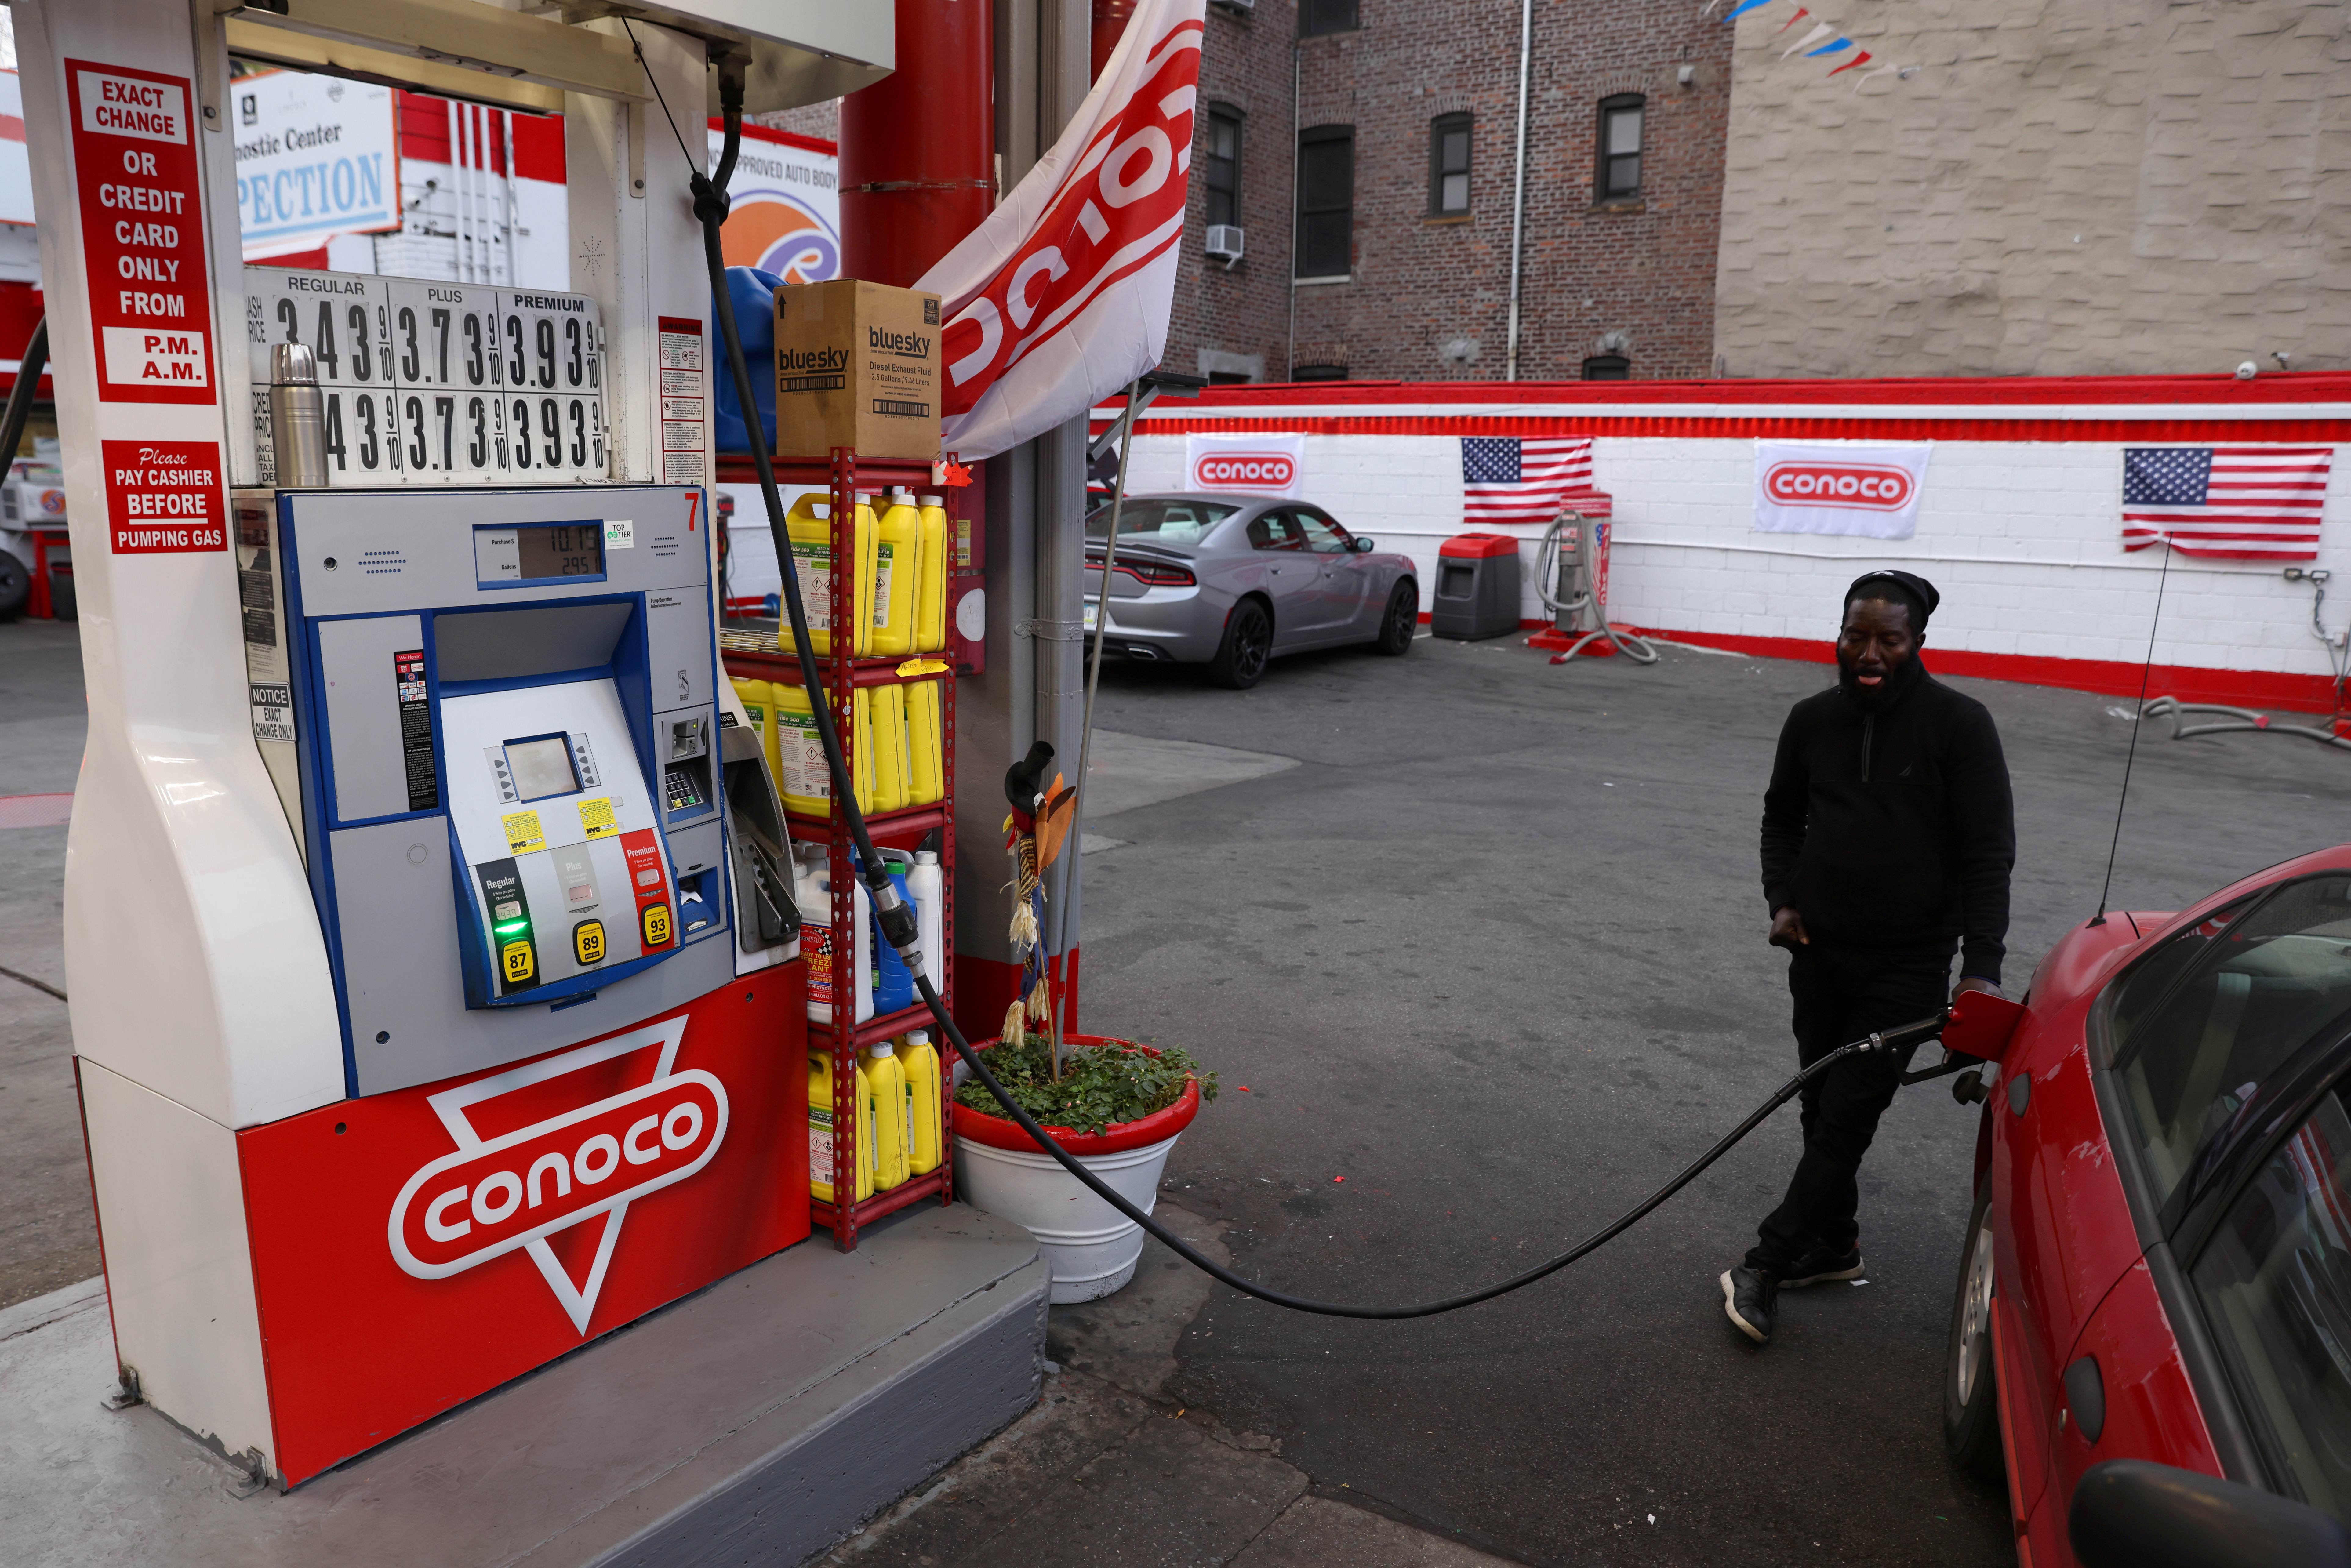 A person pumps gasoline at a Conoco gas station, a brand owned by Phillips 66, in Brooklyn, New York, U.S., November 11, 2021. REUTERS/Andrew Kelly/File Photo